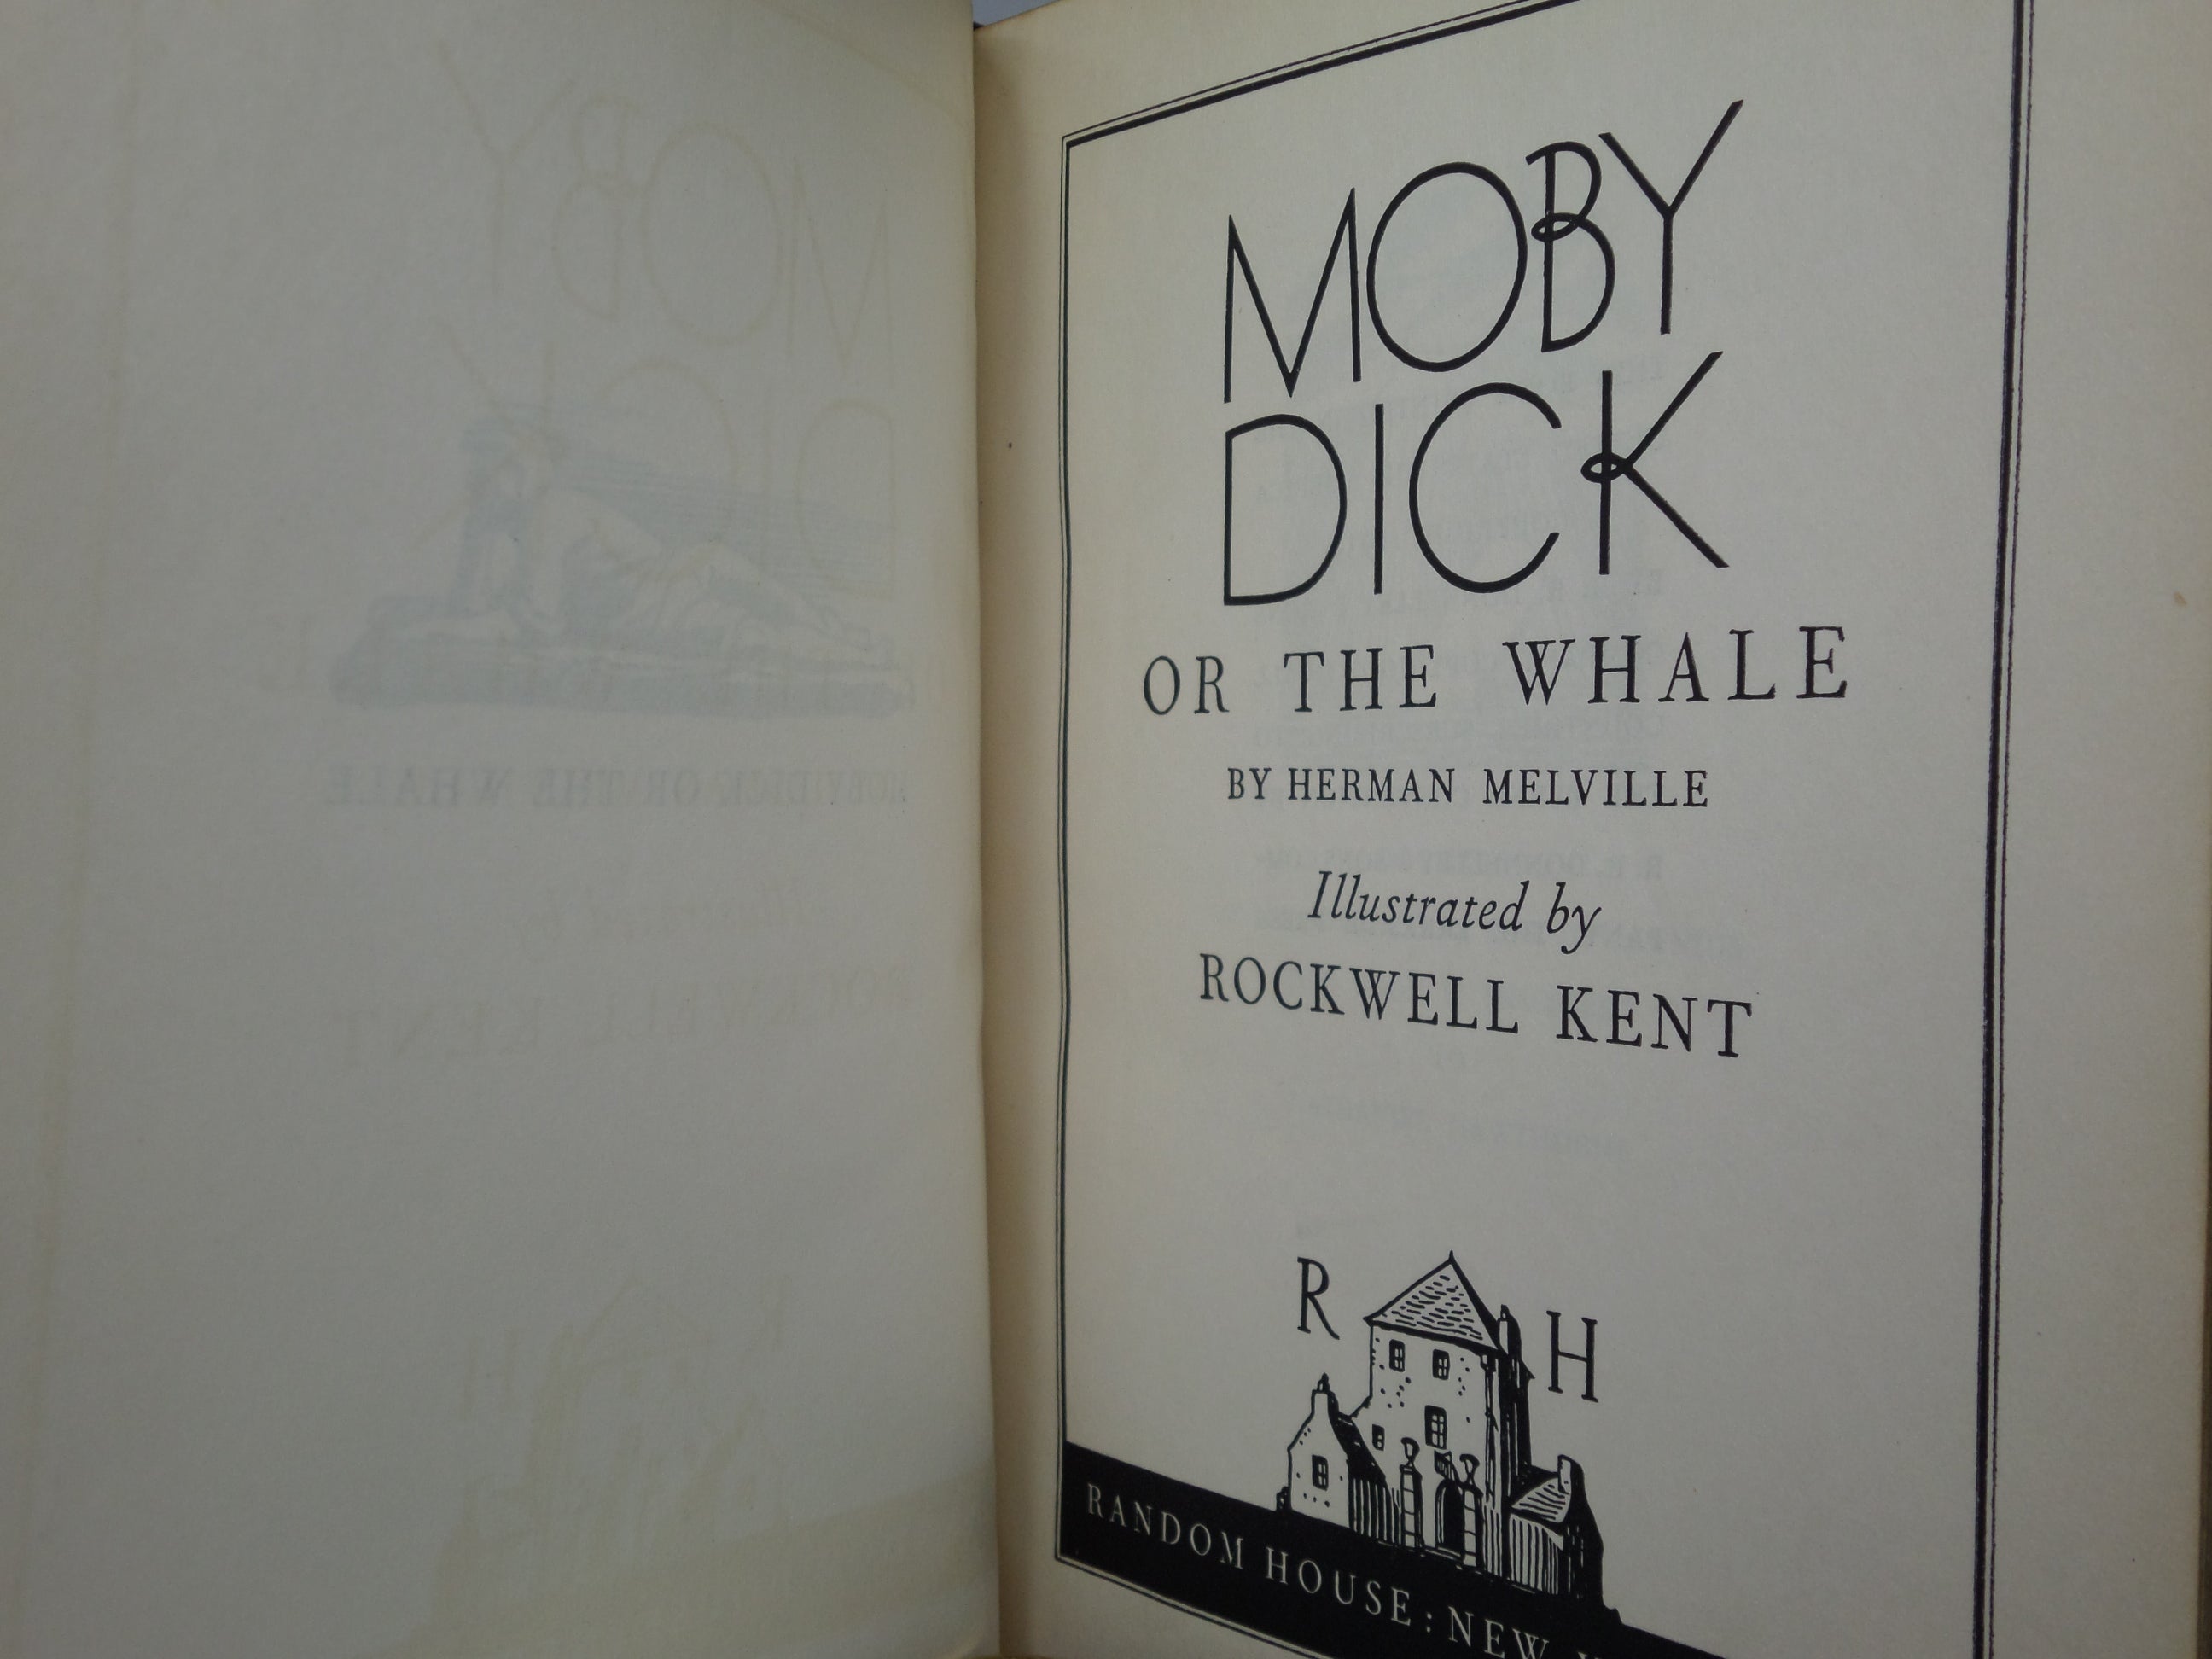 MOBY DICK BY HERMAN MELVILLE 1930 FINE RIVIERE BINDING